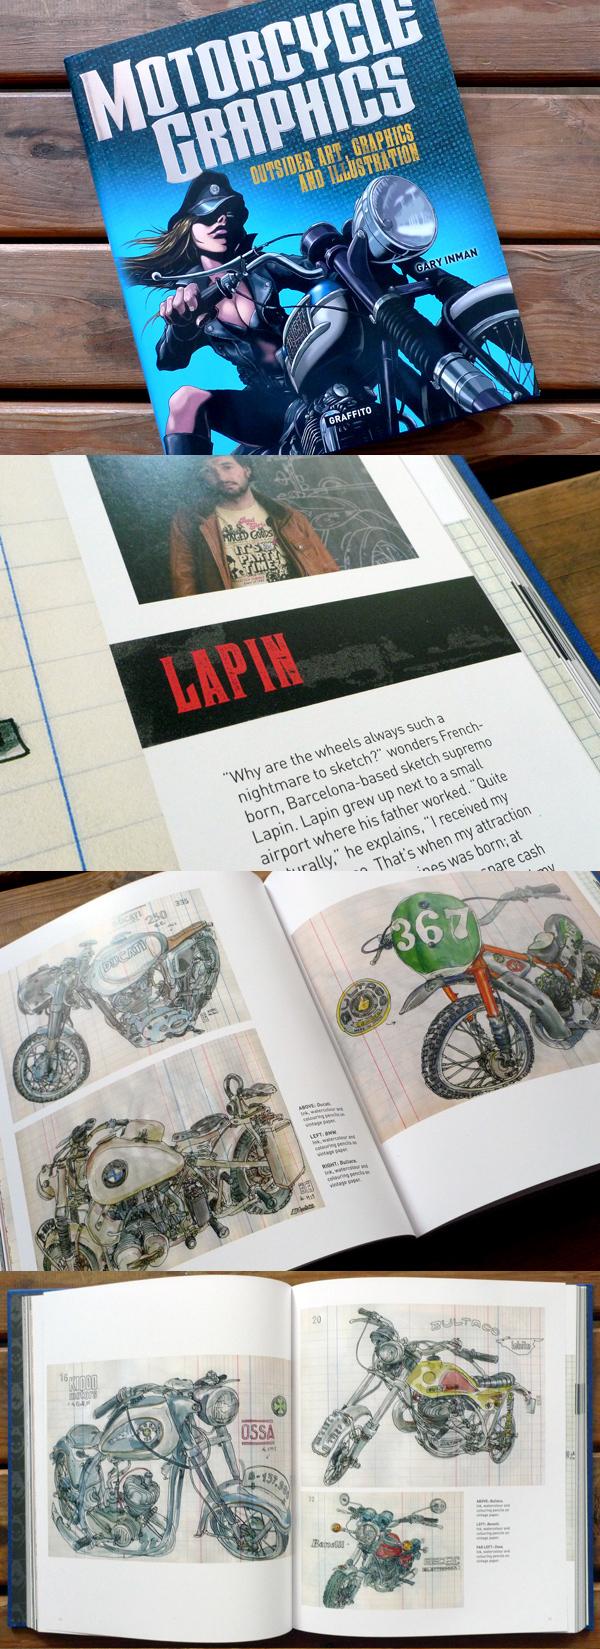 "motorcycle graphics" book